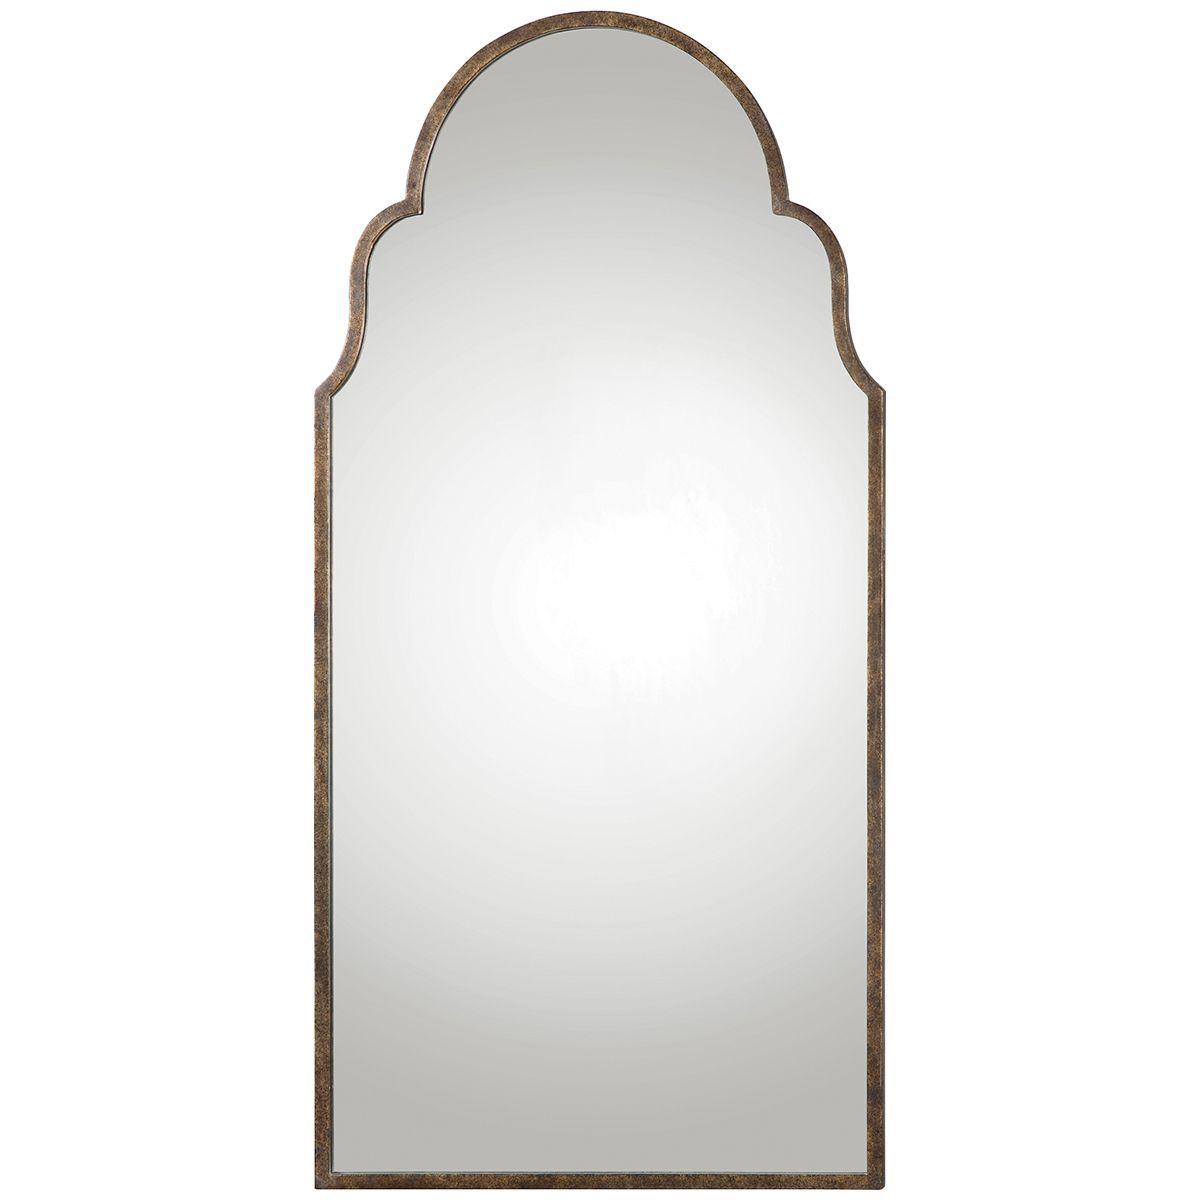 Uttermost Brayden Bronze Tall Mirror 12905 | Arch Mirror, Mirror Wall Throughout Waved Arch Tall Traditional Wall Mirrors (View 5 of 15)